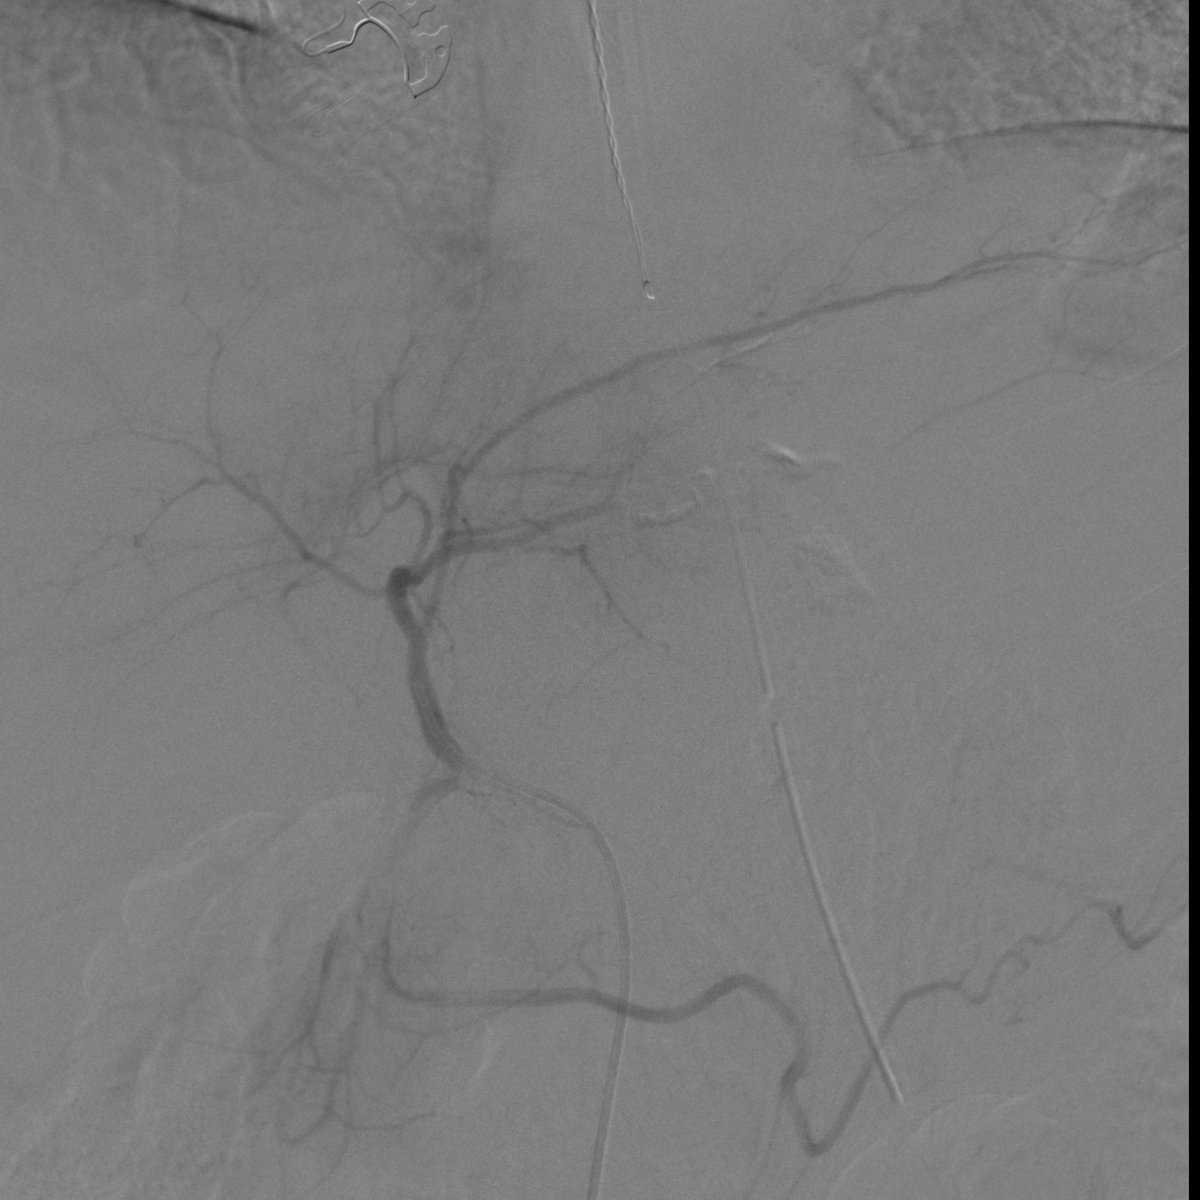 Trauma patient on massive transfusion protocol due to hemorrhage from hepatic segment III. Immediate hemostasis achieved with 0.1 cc of 1:2 glue. Patient stabilized and discharged in a few days. #iRad #MedTwitter #justglueit #Trauma #stopthebleed #iradres #WithoutAScalpel